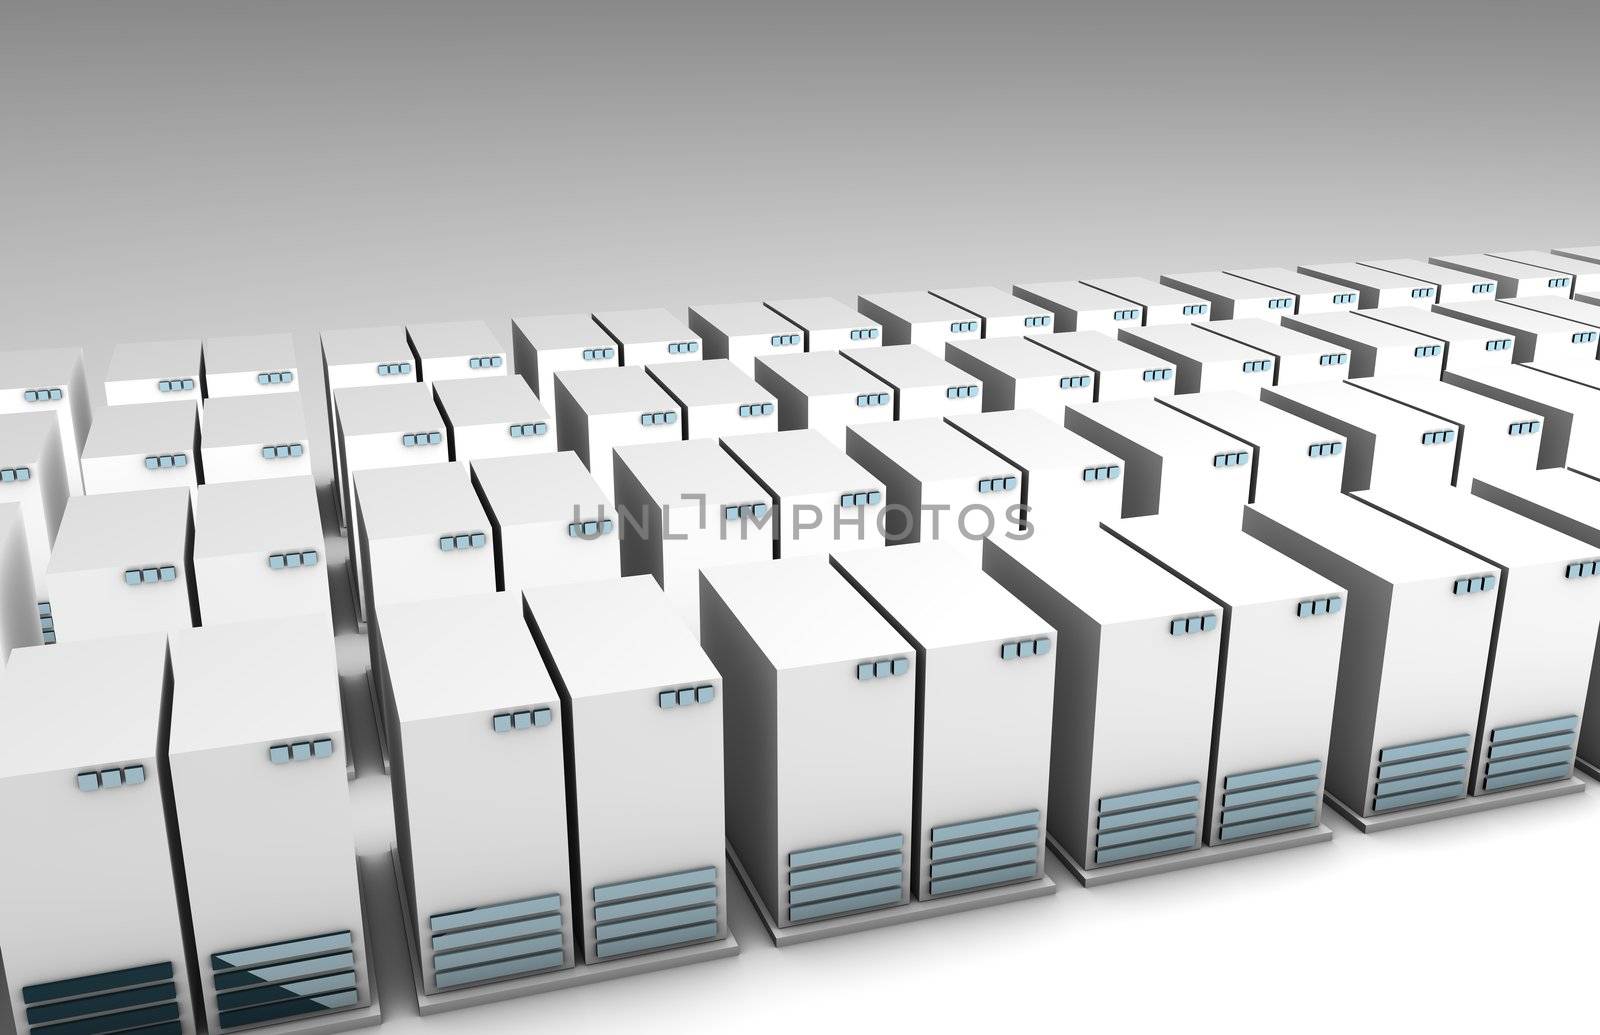 Rows of Servers at a Data Storage Center